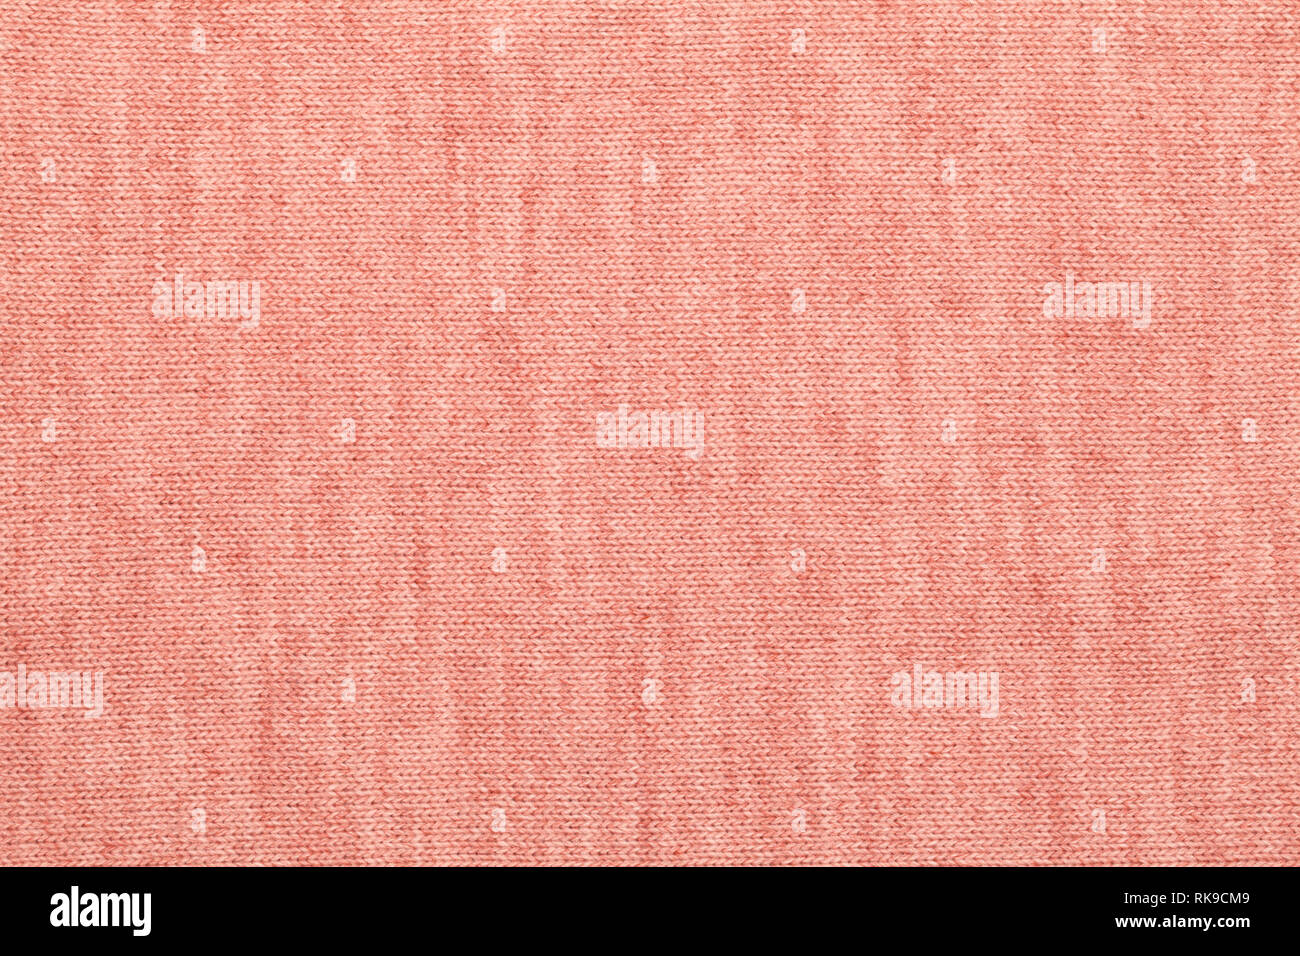 Living coral trendy color of the year 2019 knitted fabric made of heathered yarn textured background Stock Photo